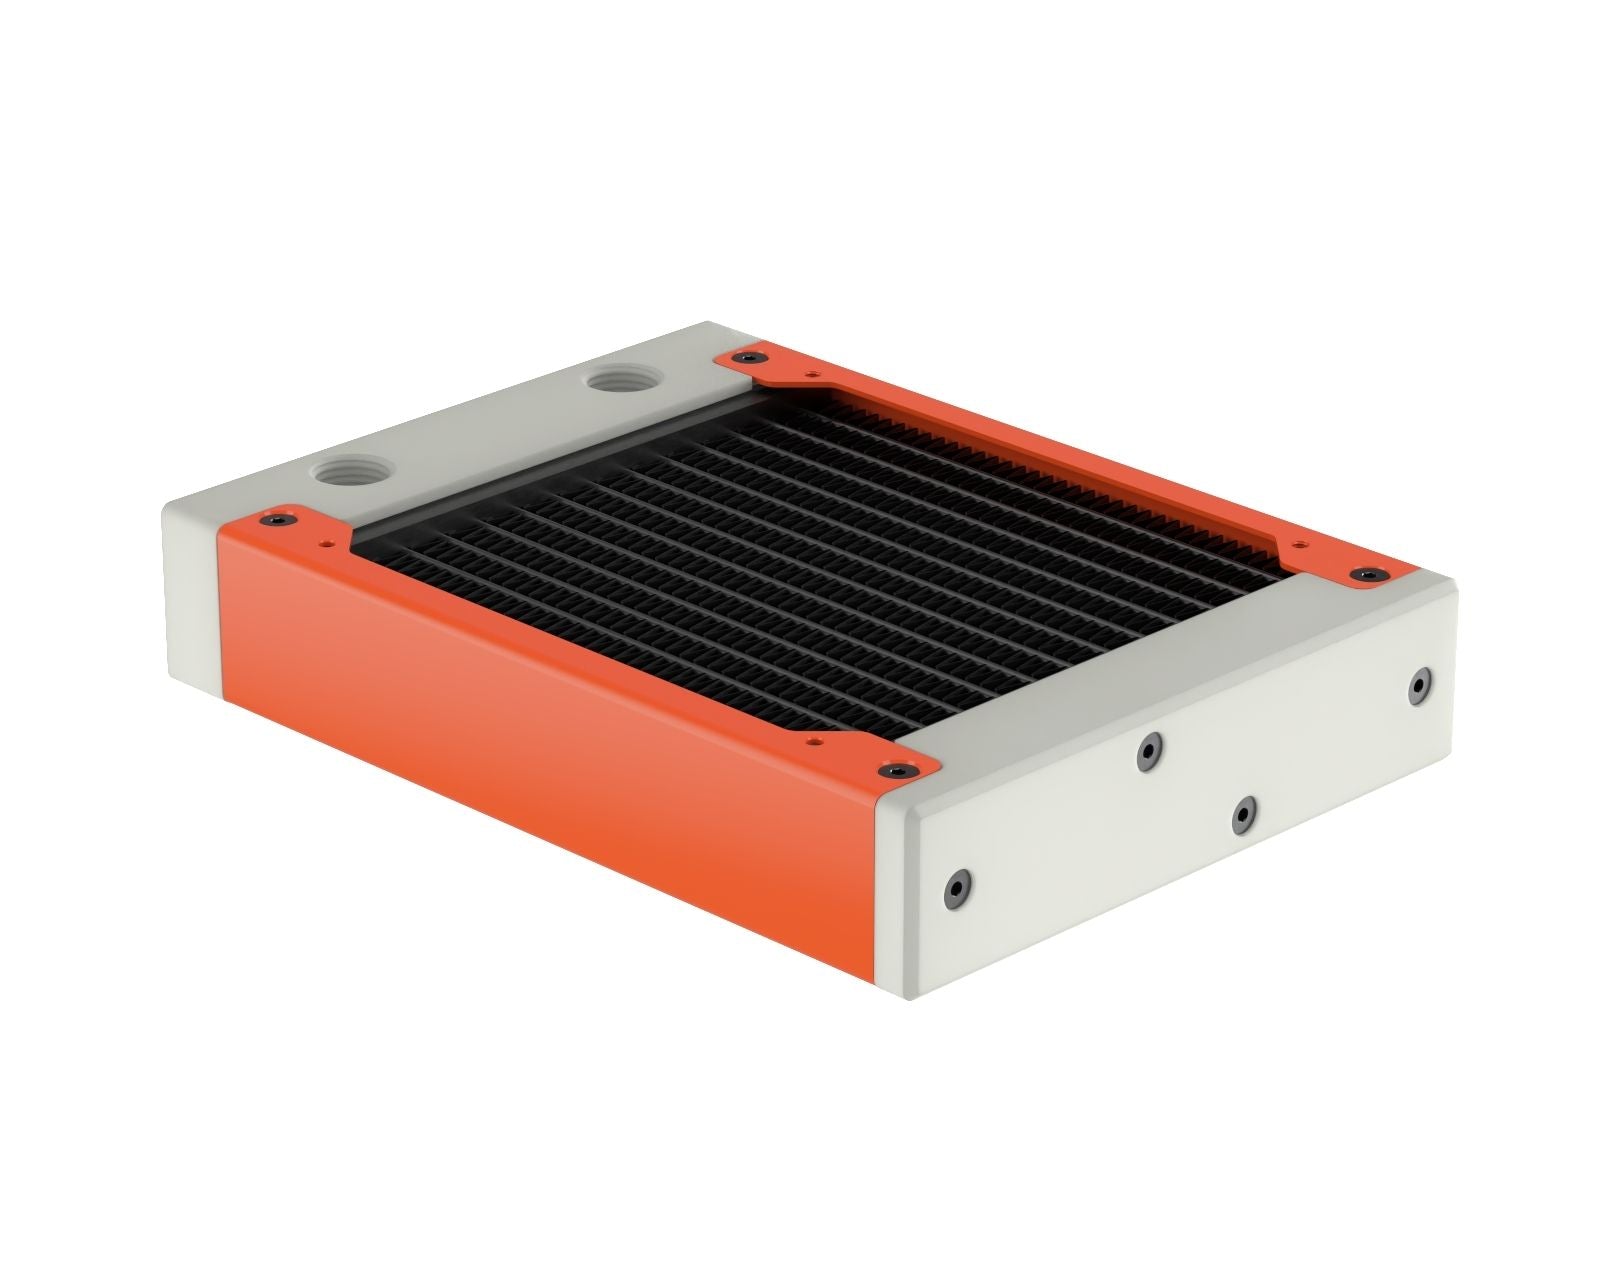 PrimoChill 120SL (30mm) EXIMO Modular Radiator, White POM, 1x120mm, Single Fan (R-SL-W12) Available in 20+ Colors, Assembled in USA and Custom Watercooling Loop Ready - UV Orange